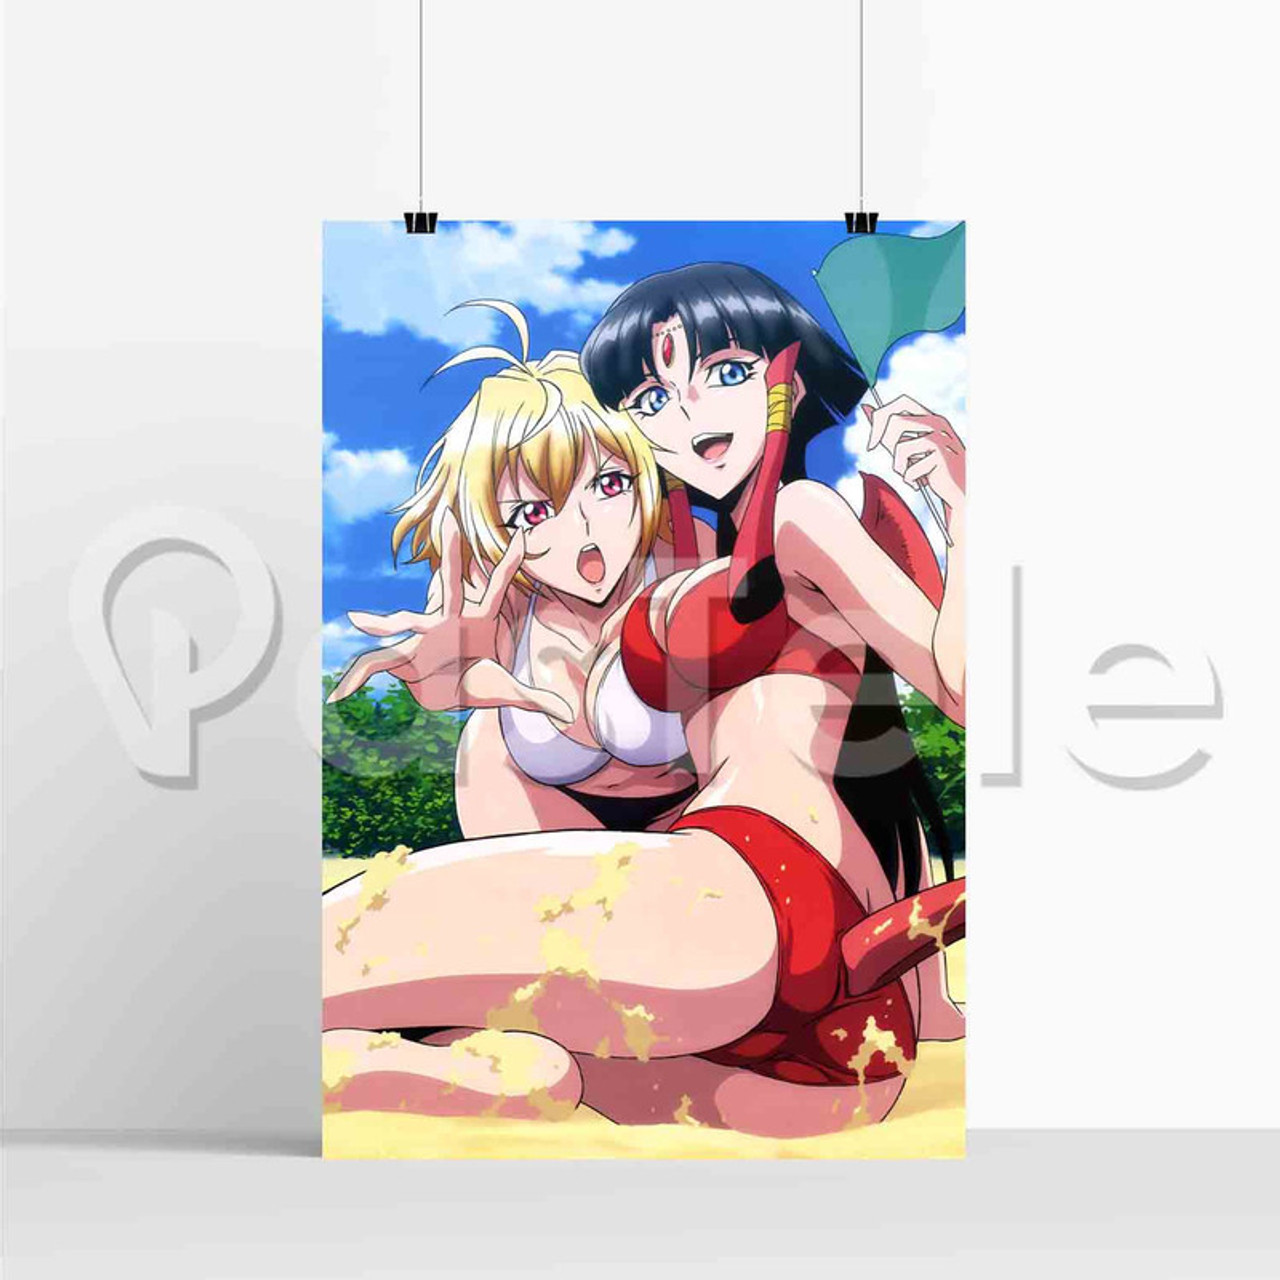 Sexy Girl Cross Ange Rondo of Angels and Dragons tr Silk Poster Printed  Wall Decor 20 x 13 Inch 24 x 3